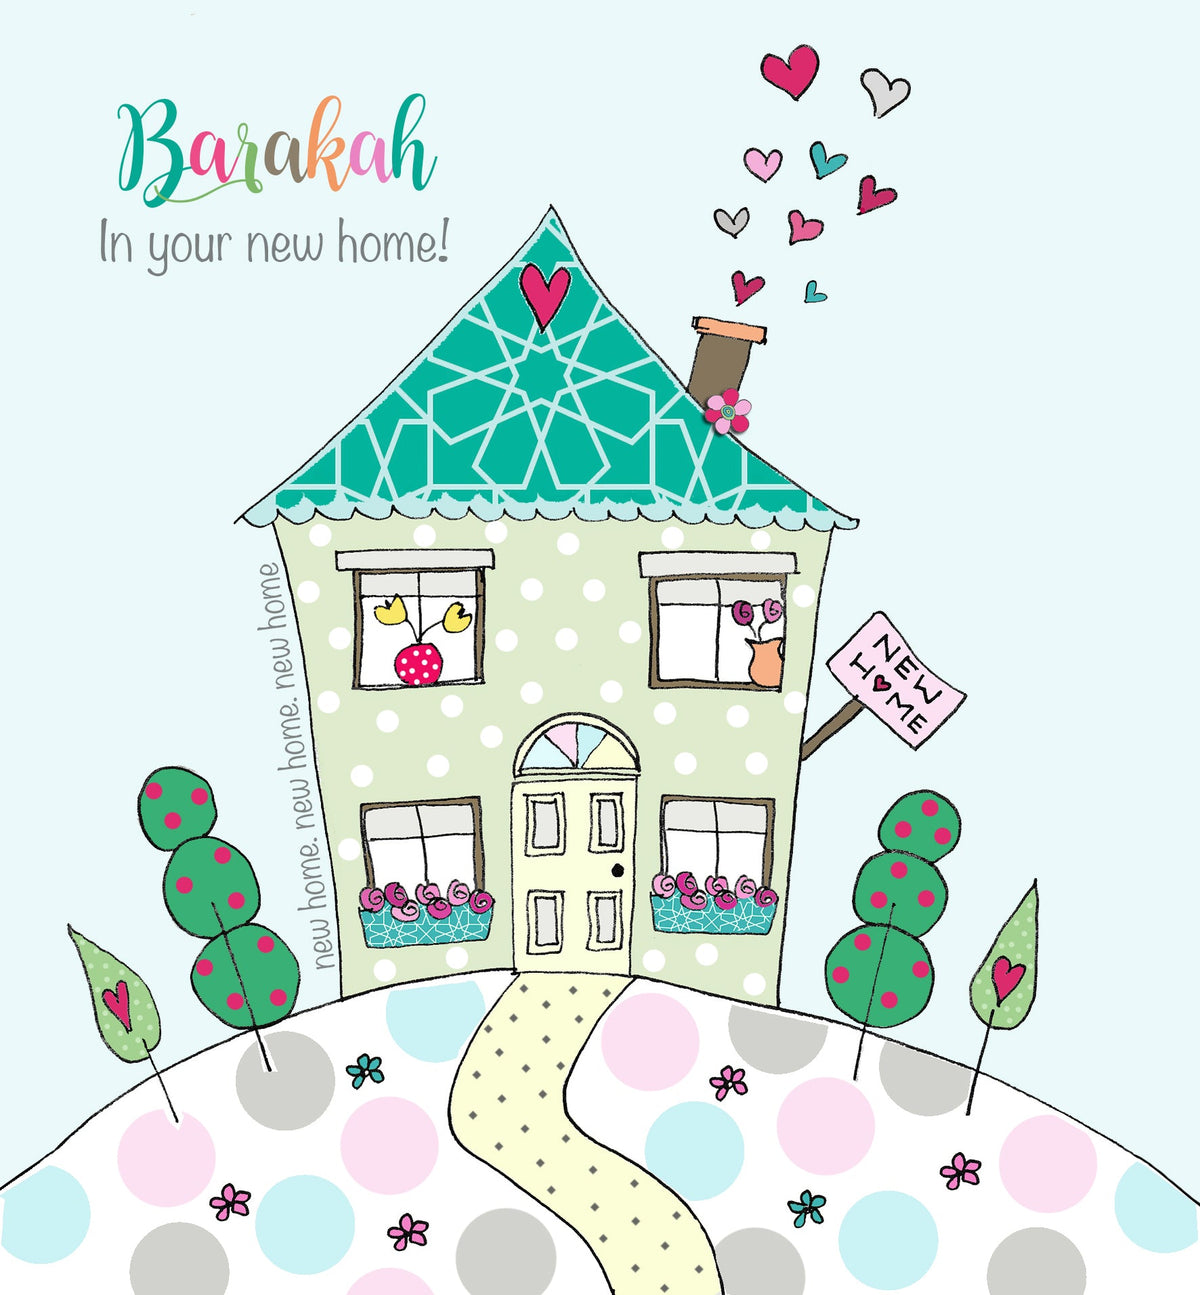 Barakah in your new home